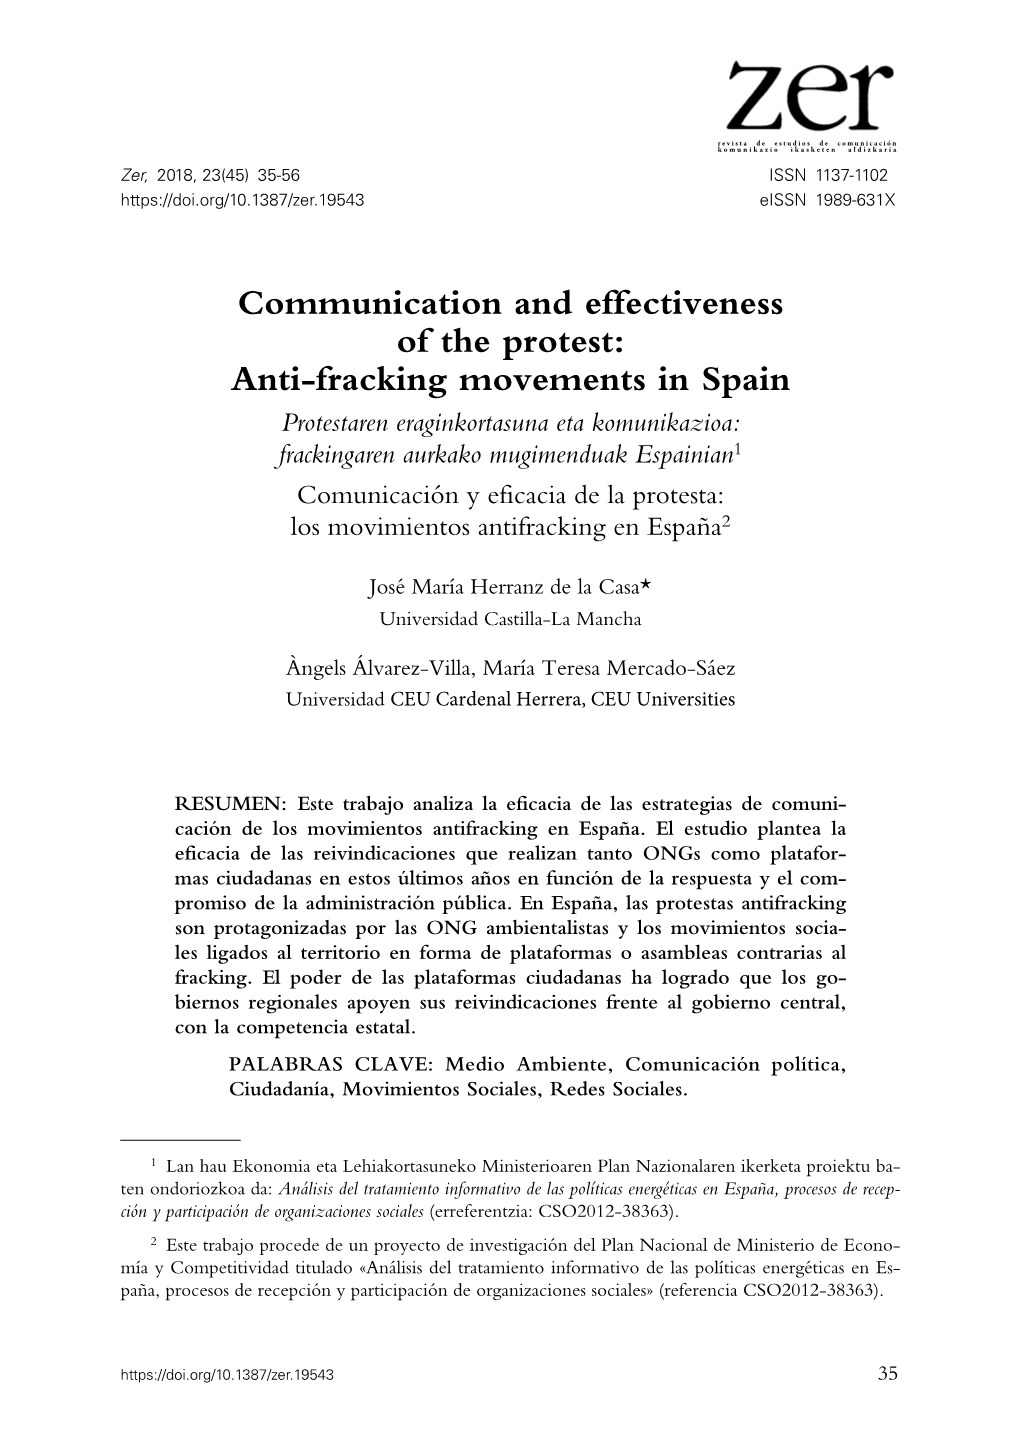 Communication and Effectiveness of the Protest: Anti-Fracking